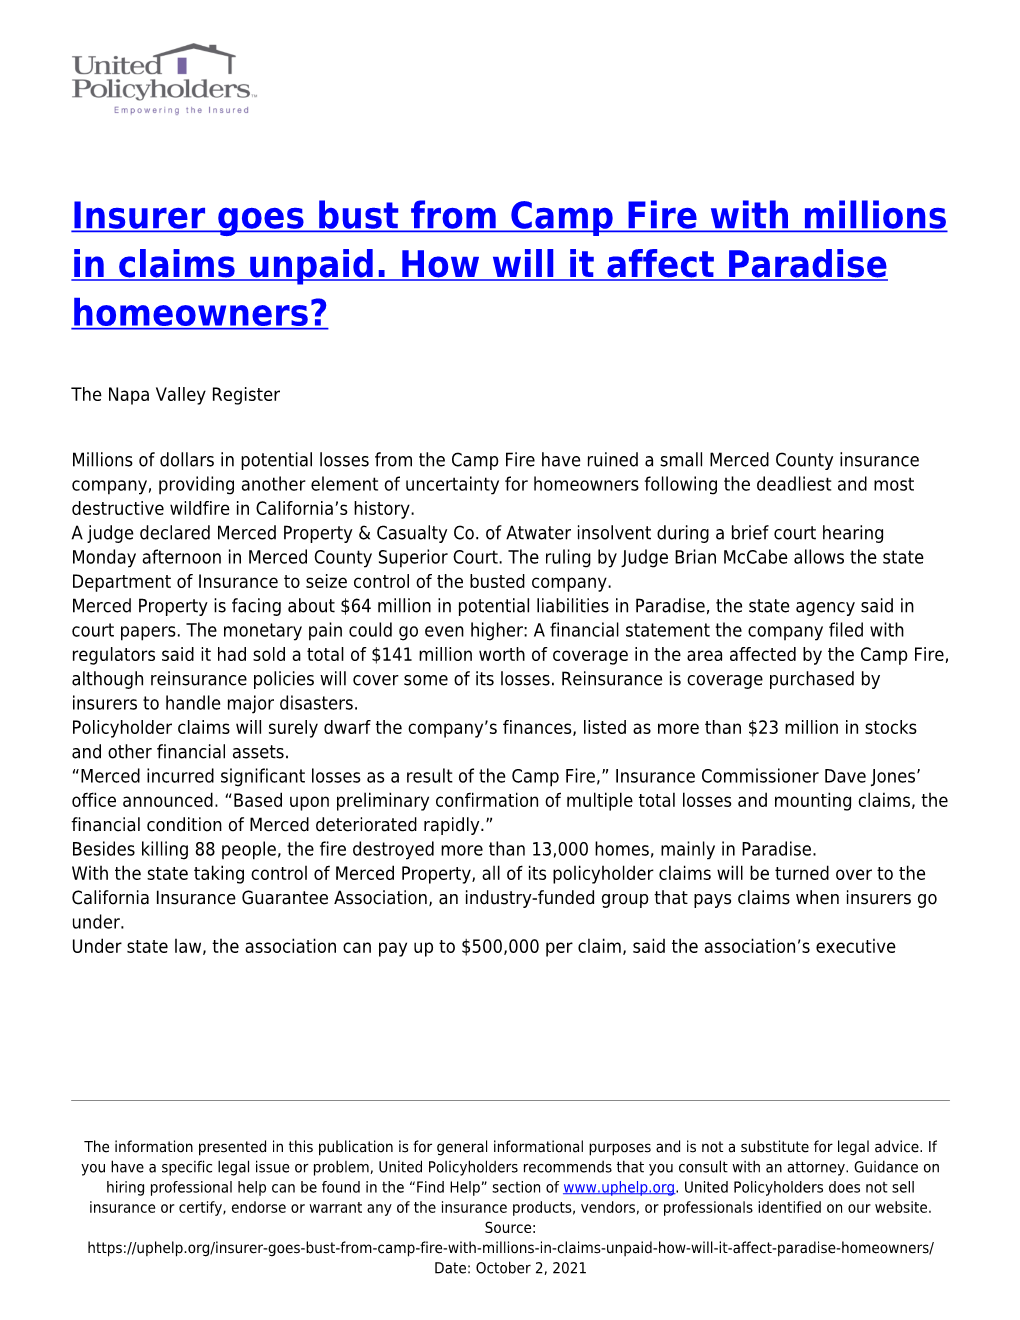 Insurer Goes Bust from Camp Fire with Millions in Claims Unpaid. How Will It Affect Paradise Homeowners?